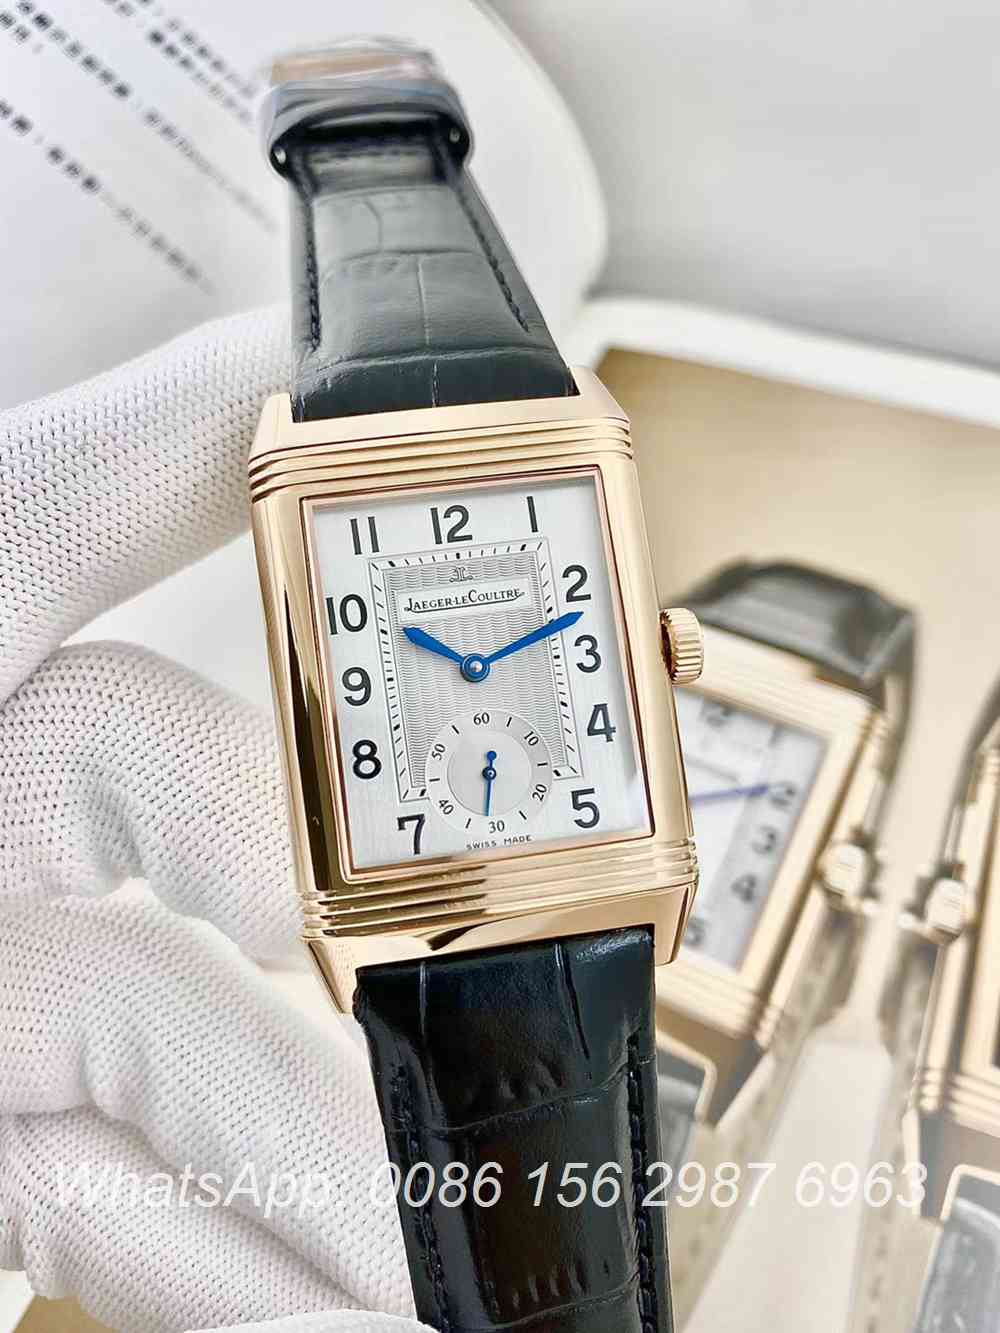 JL160XD319, JL reverso classic large duoface small second men's watch rose gold